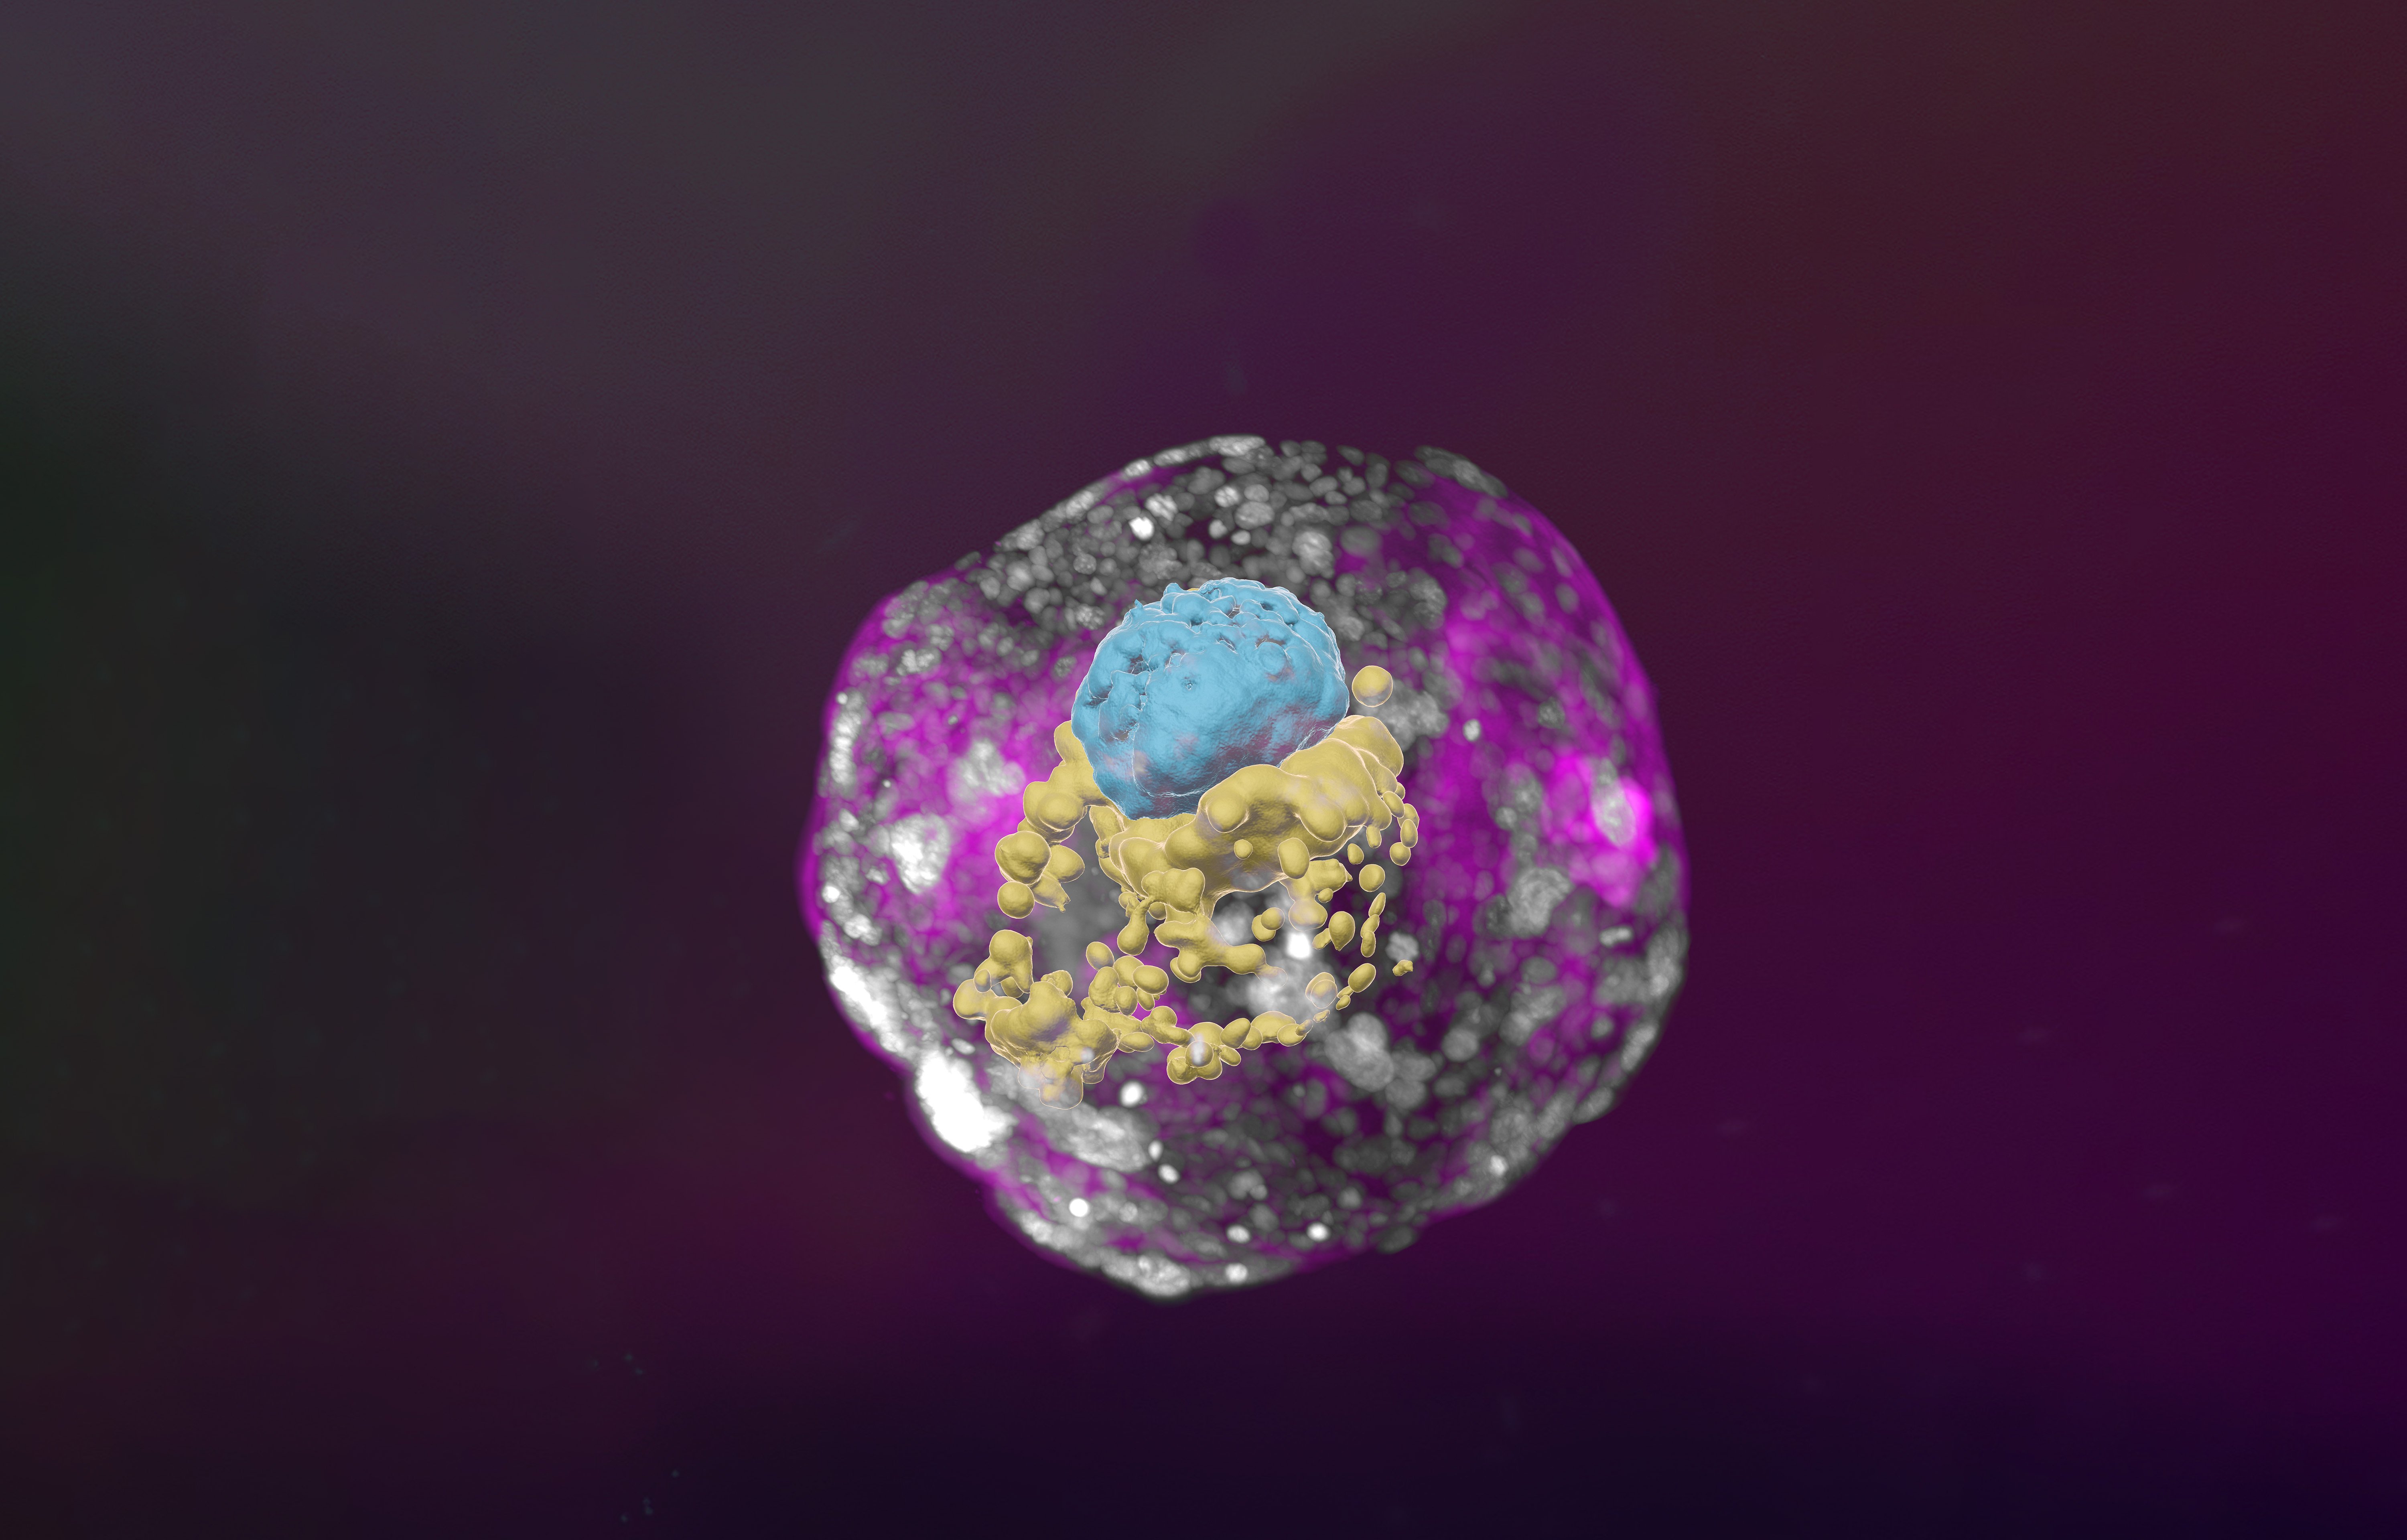 A 3D image of the Hanna labs human embryo model on day 14 including the placenta